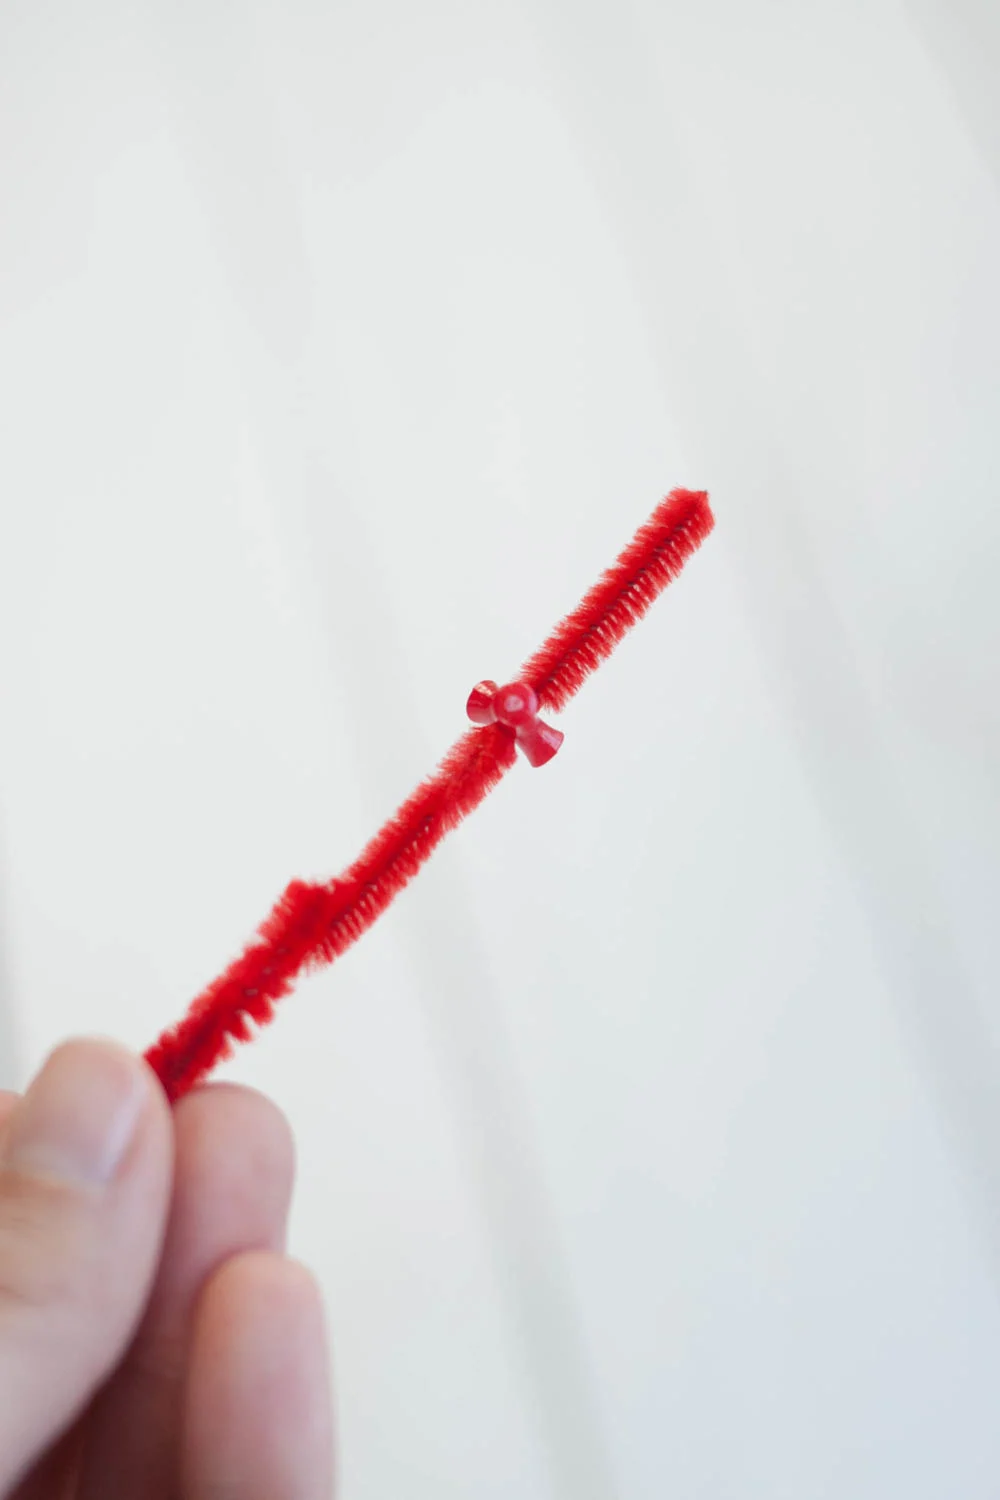 Adding a bead to a pipe cleaner